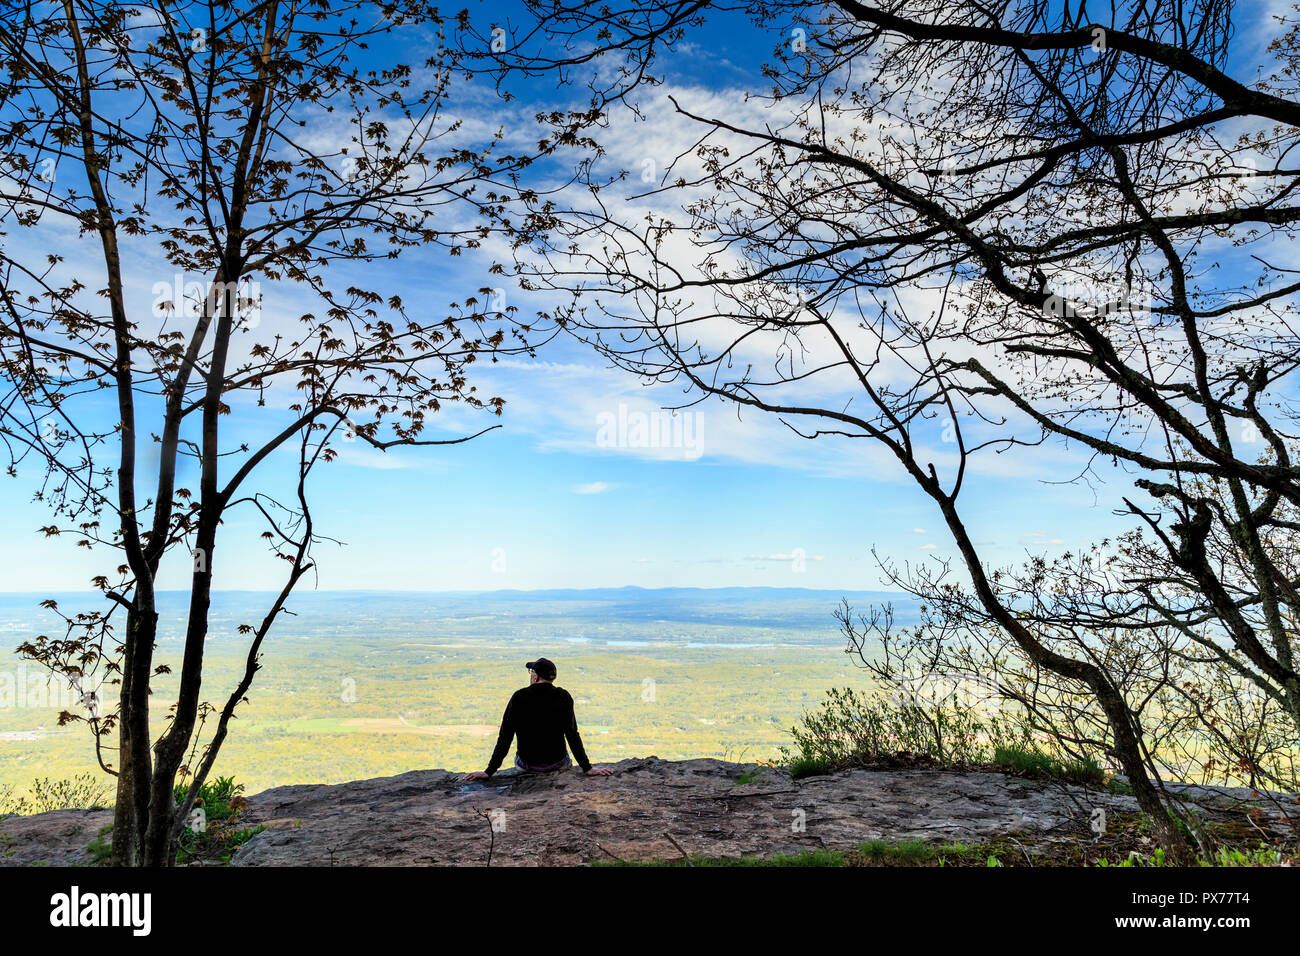 Site of Historic Catskill Mountain House with View over New York Landscape, near Tannersville, New York, USA Stock Photo